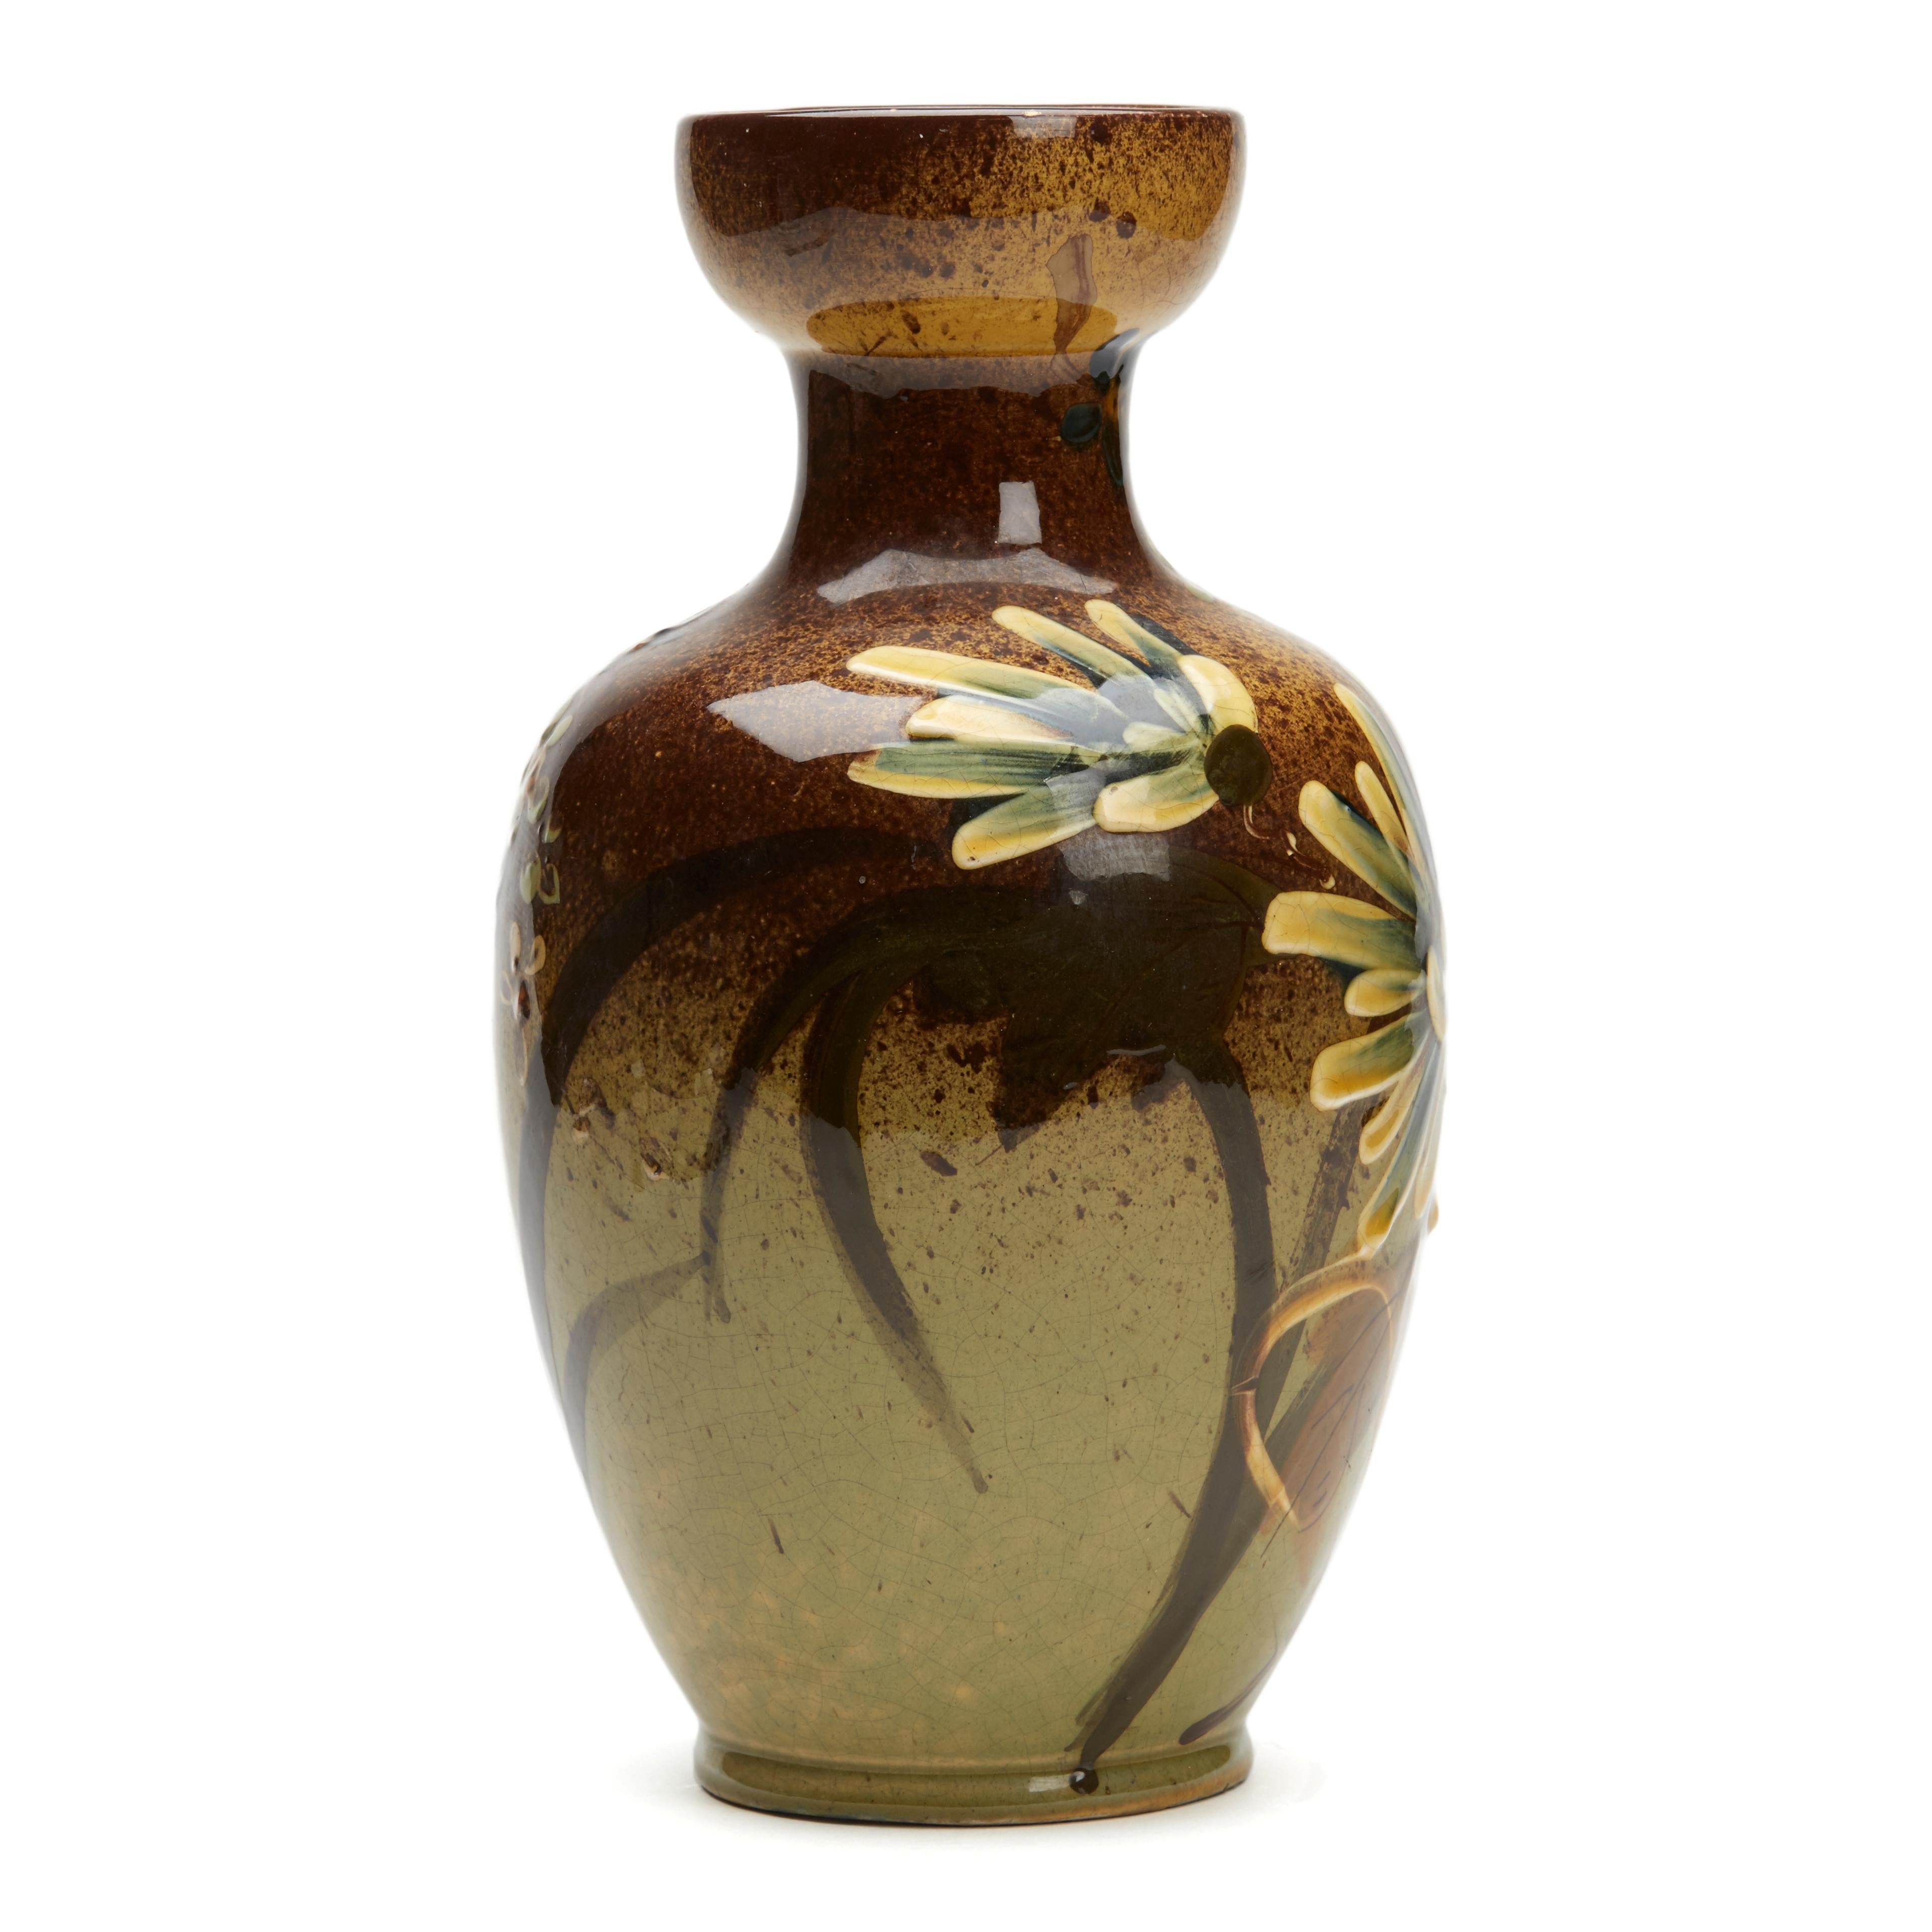 A stunning antique Thomas Forester hand painted art pottery vase decorated with large flowering blooms dating from around 1890. The lightly potted earthenware vase stands on a narrow round unglazed foot with slightly recessed base with a bulbous